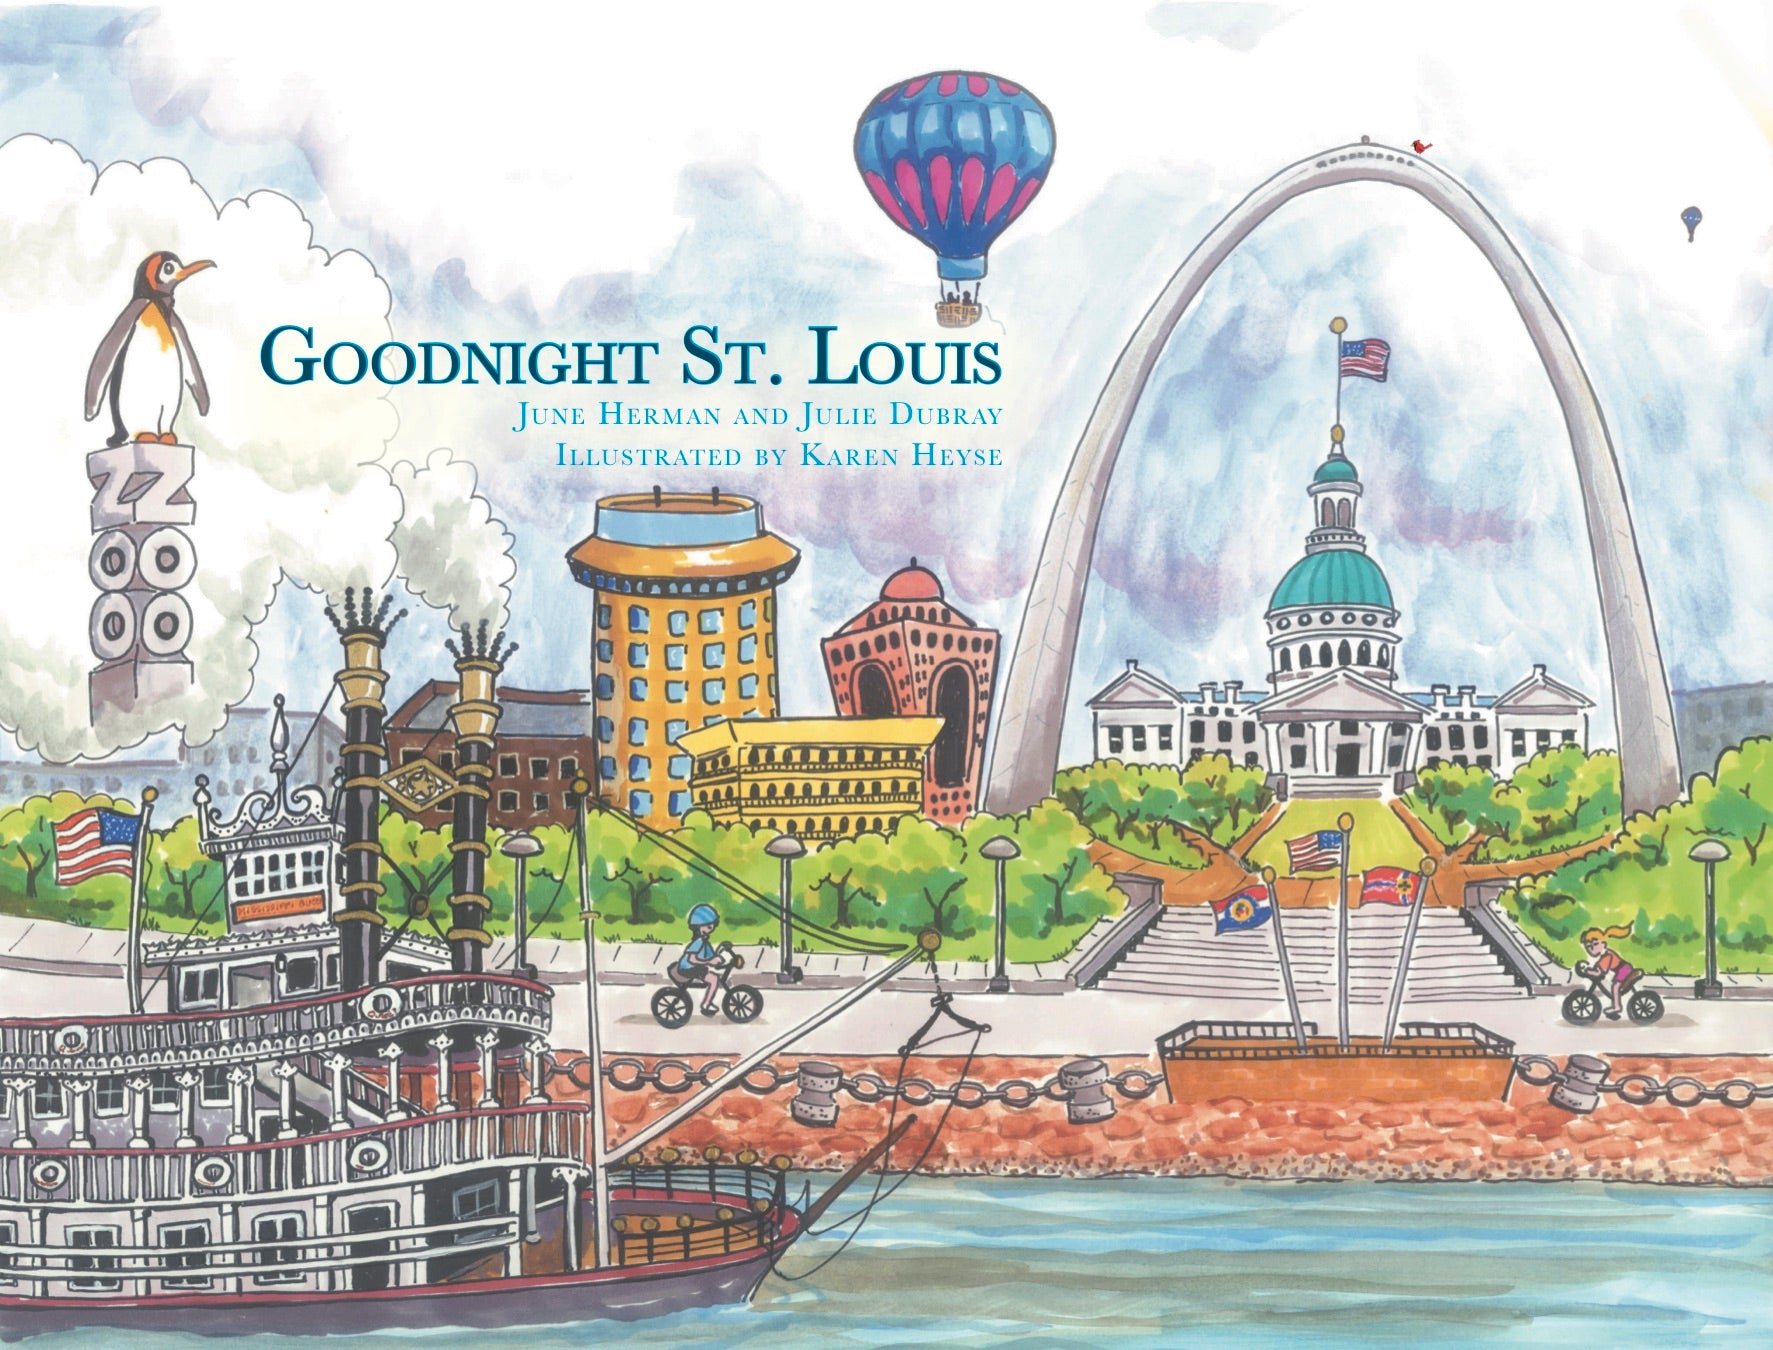 Hall of Authors Event Features Goodnight St. Louis Authors